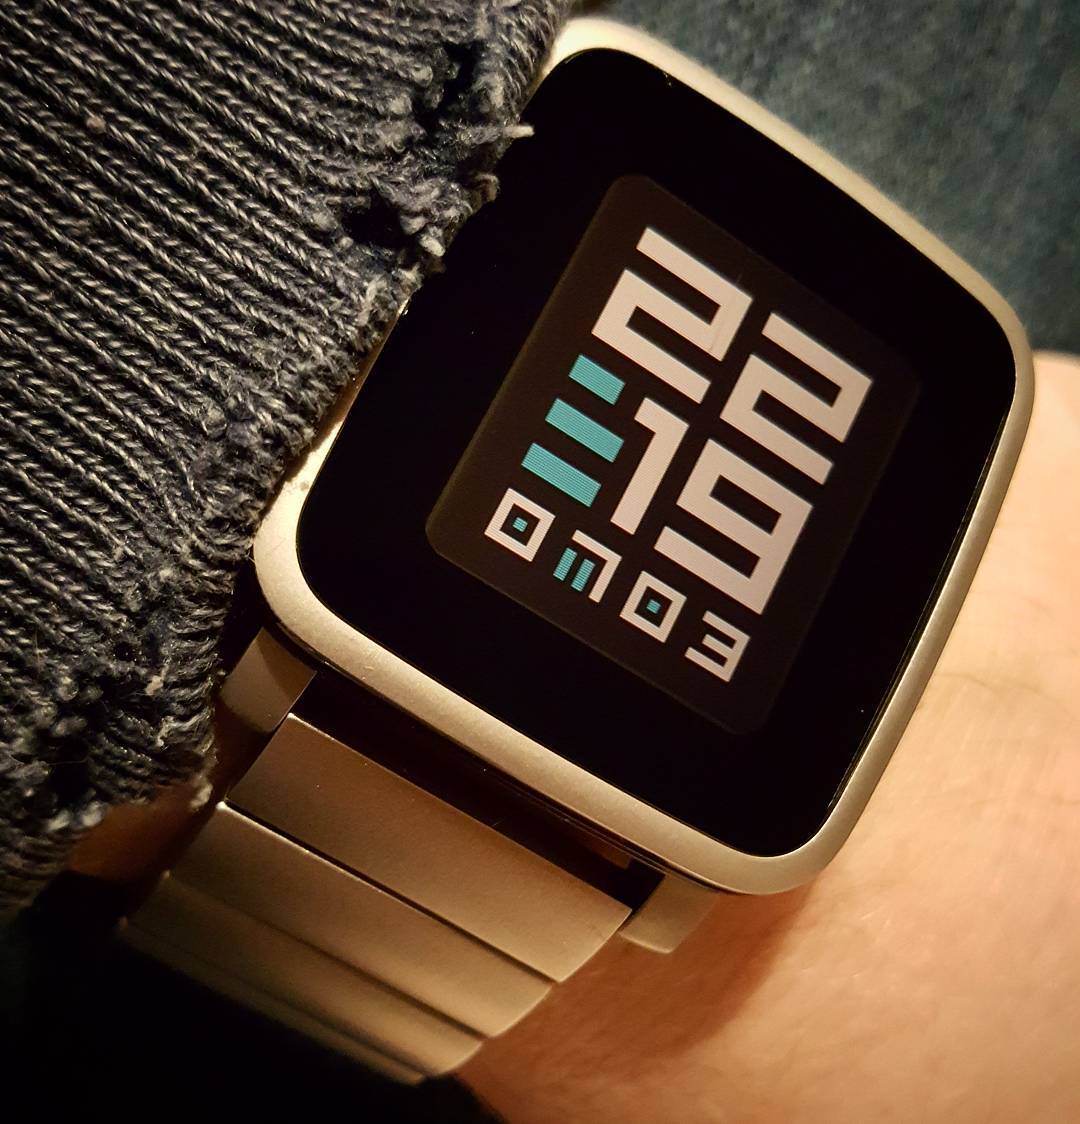 Squared 4.0 - Pebble Watchface on Pebble Time Steel